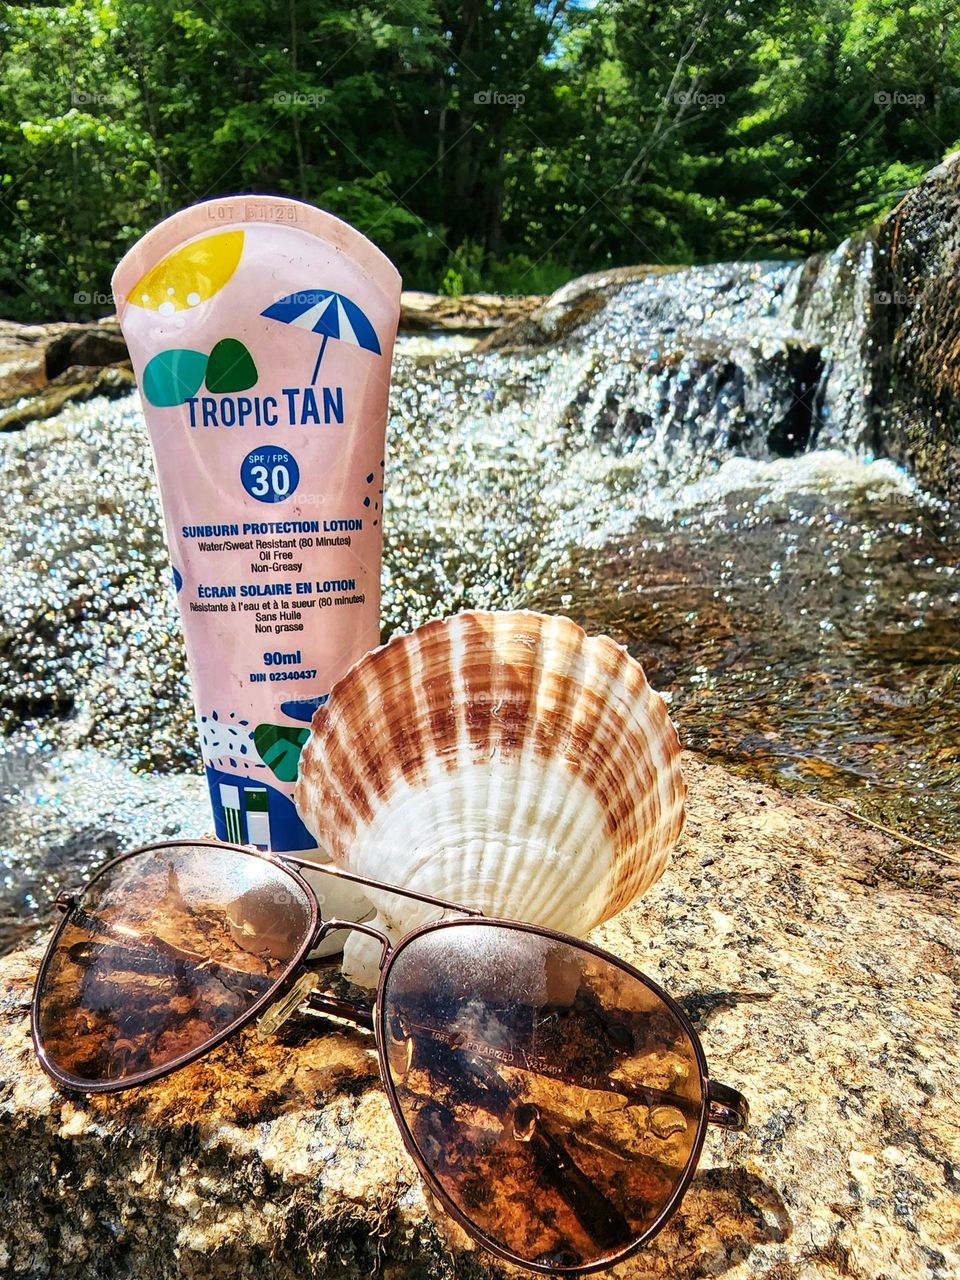 TropicTan sunscreen on a rock surrounded by cascading water.